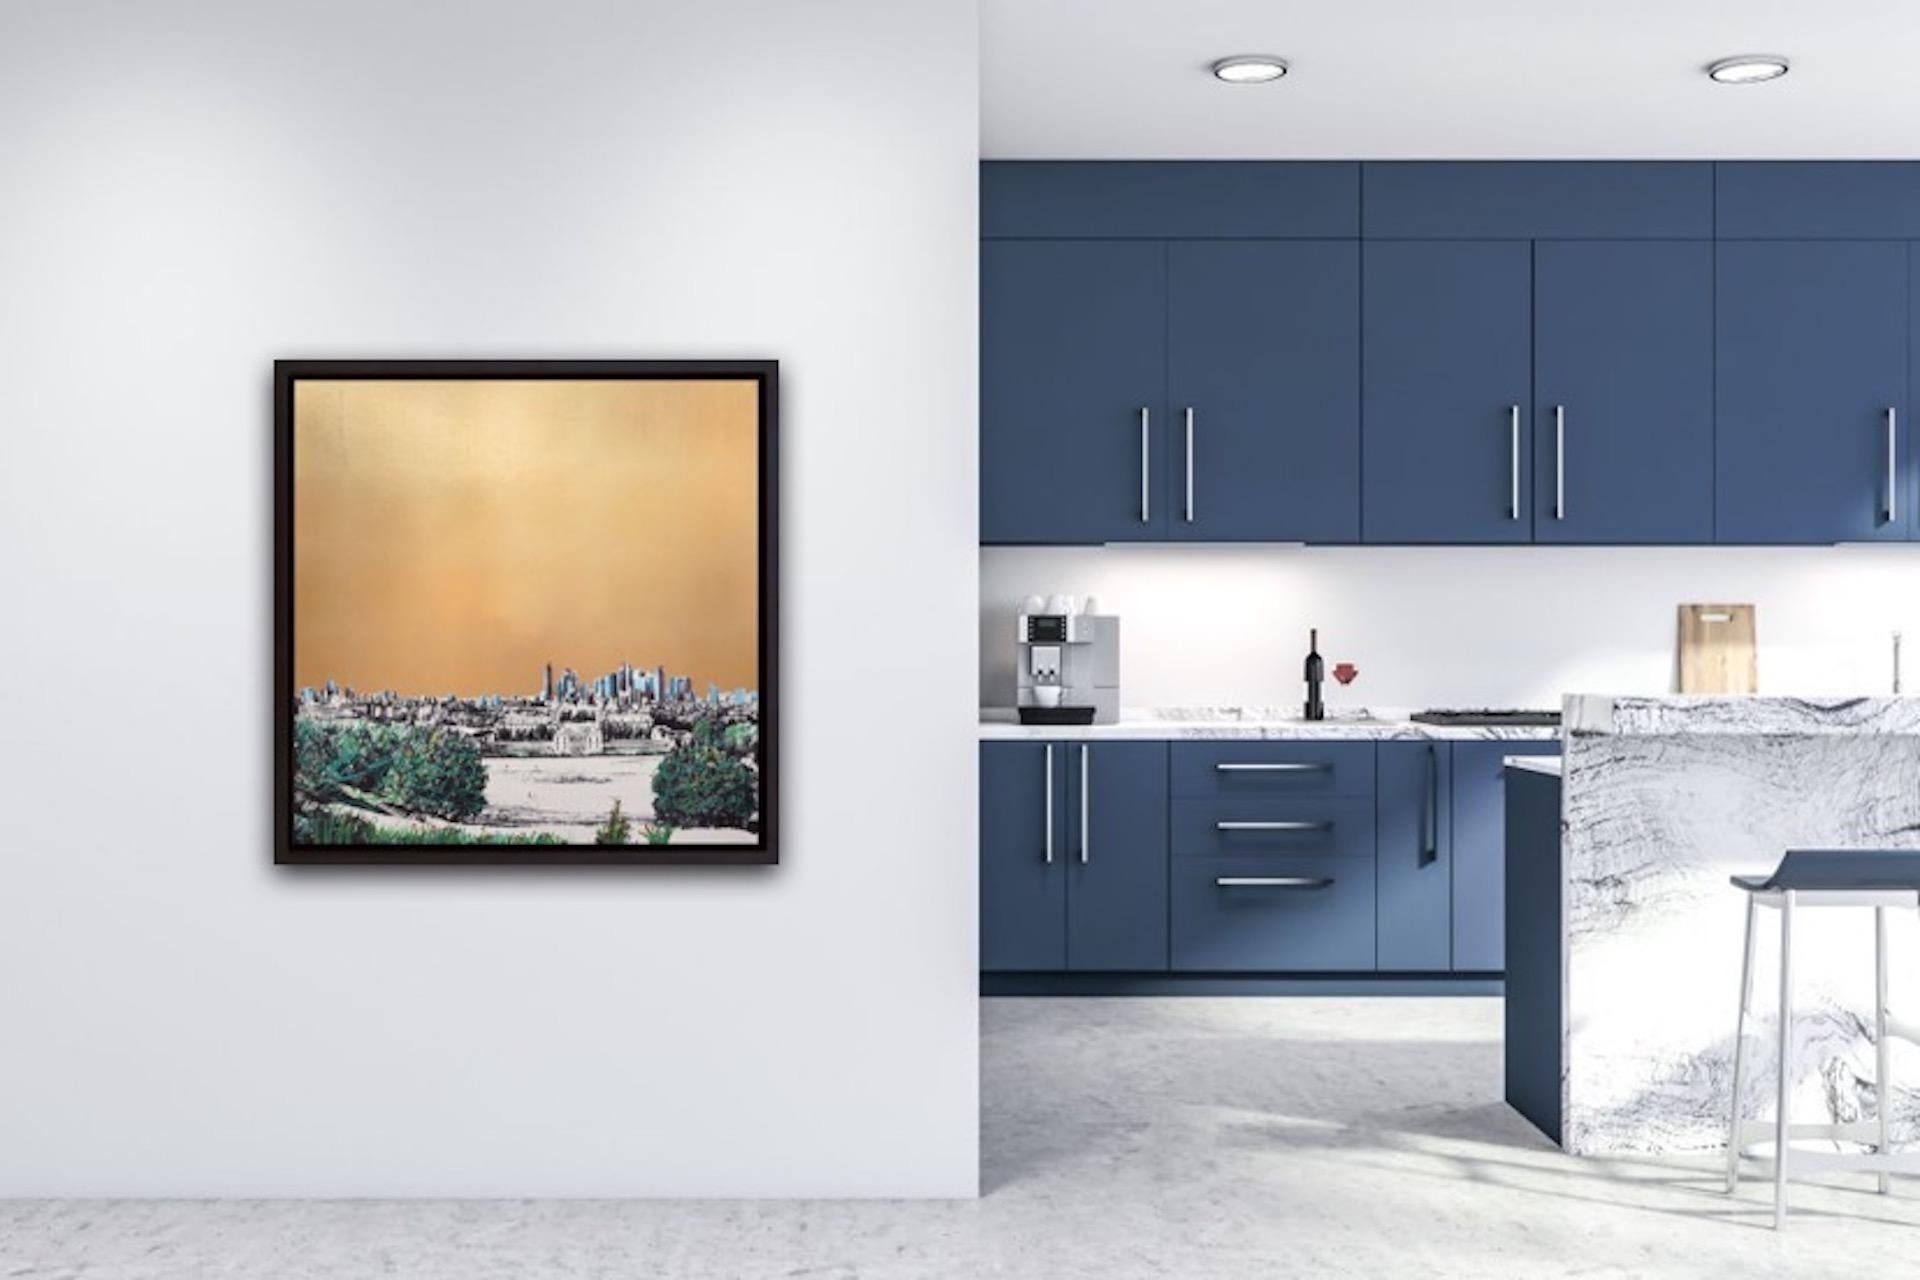 Jayson Lilley
From Greenwich Park II
Limited Edition Print
Edition of 39
Image Size: H 84cm x W 84cm
Signed
Sold Unframed

Please note that insitu images are purely an indication of how a piece may look.

From Greenwich Park II is a limited edition